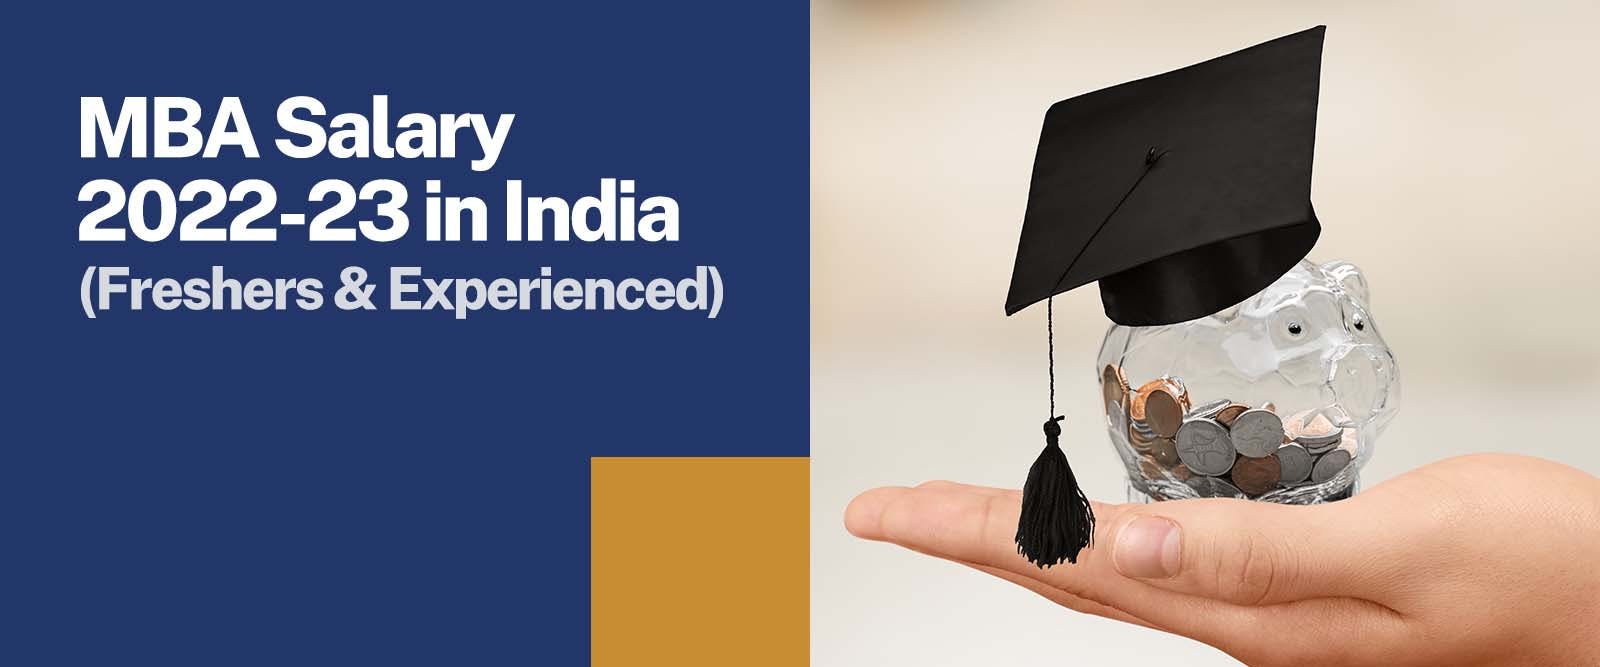 MBA Salary in India for Freshers & Experienced